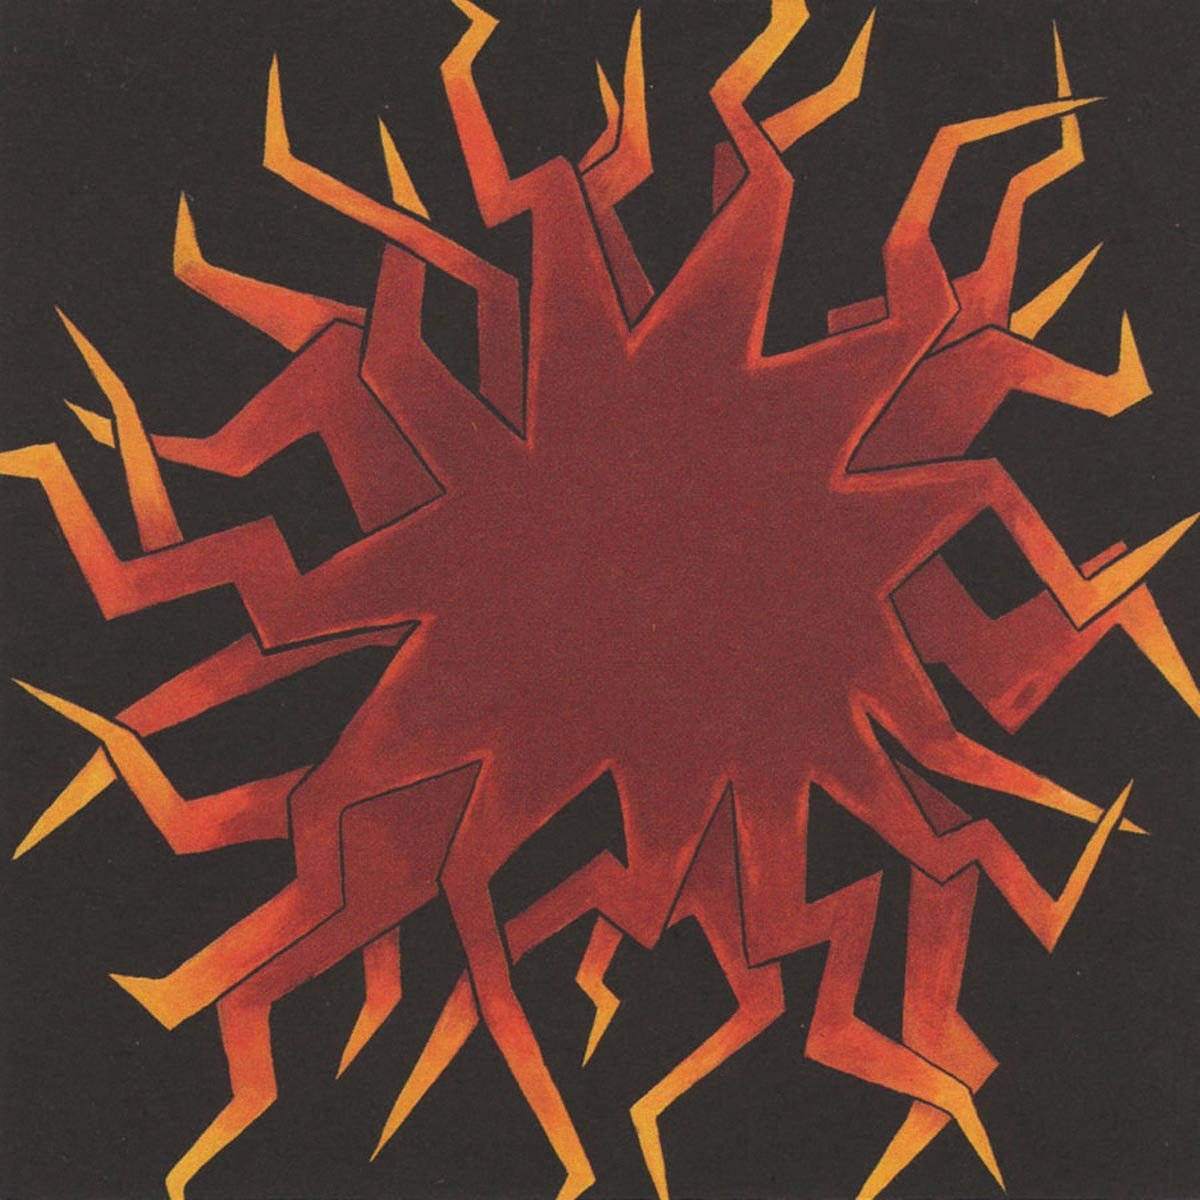 Sunny Day Real Estate: How It Feels To Be Something On:LP - Steadfast Records